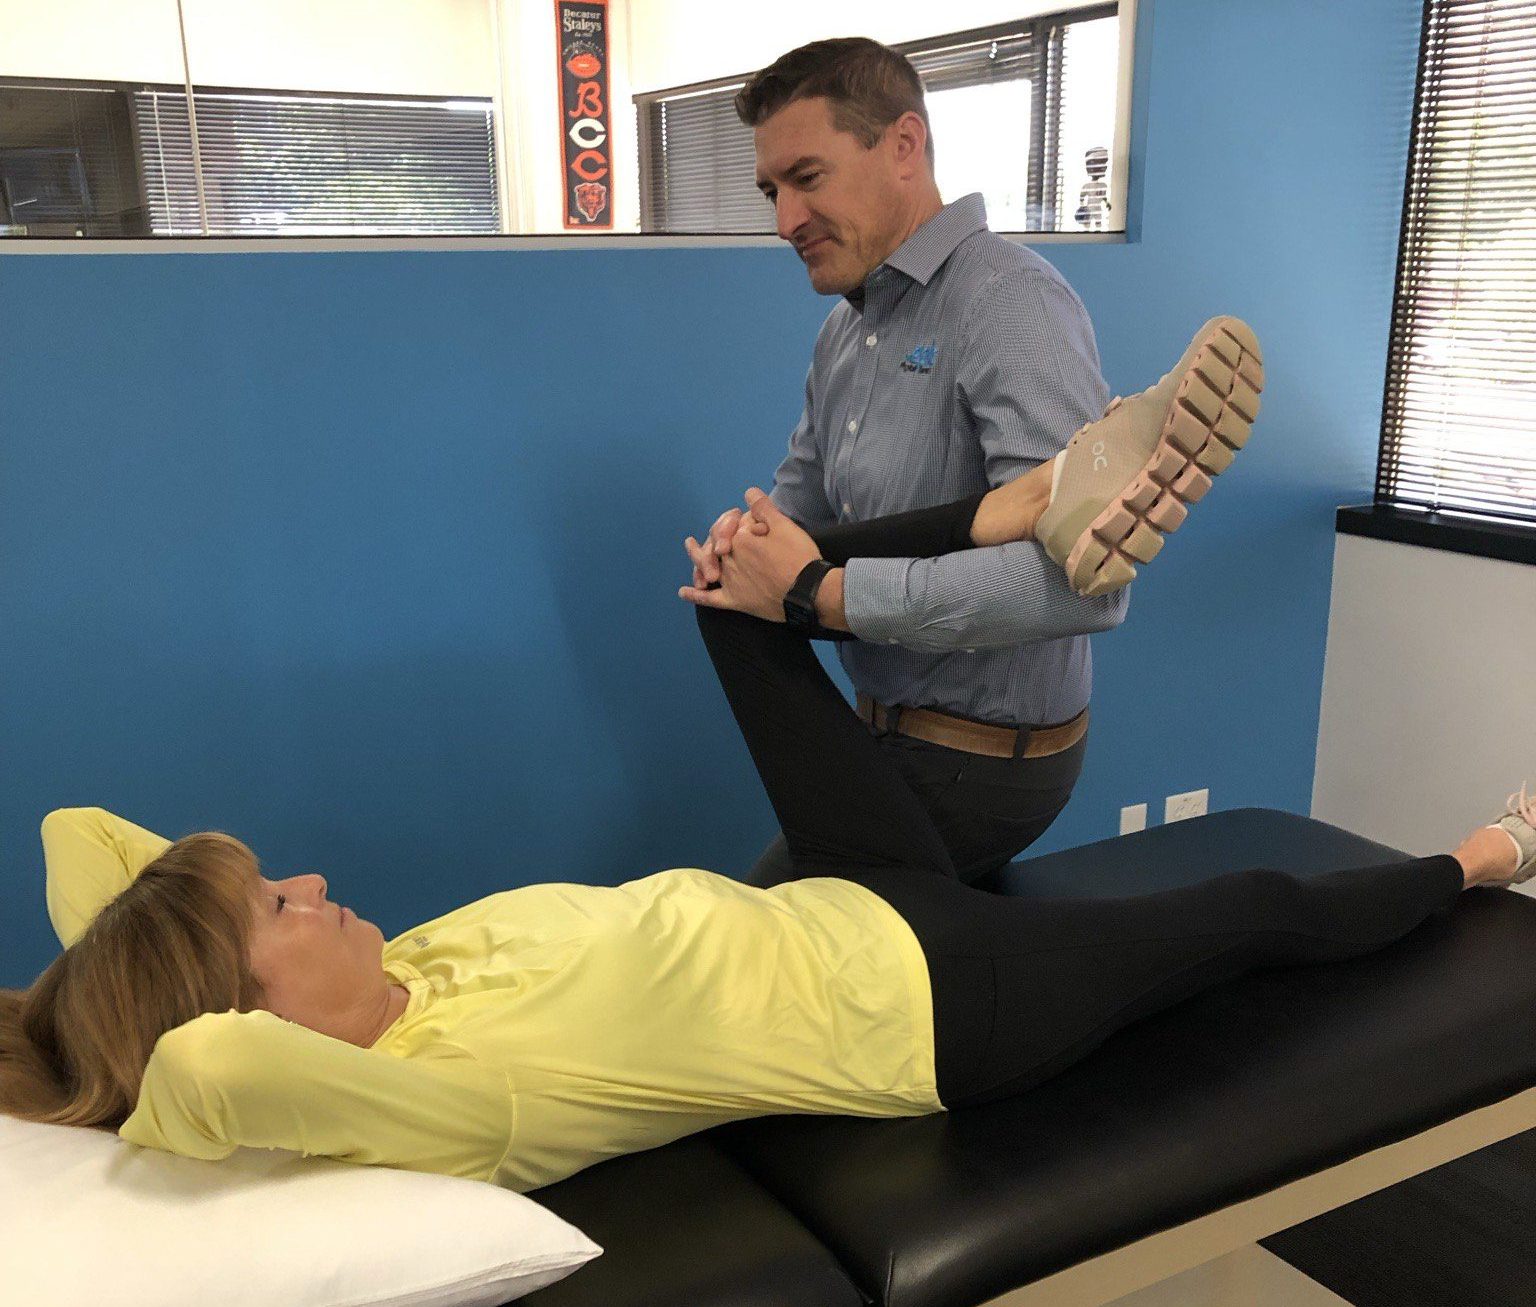 Treatment by physical therapist on hamstring